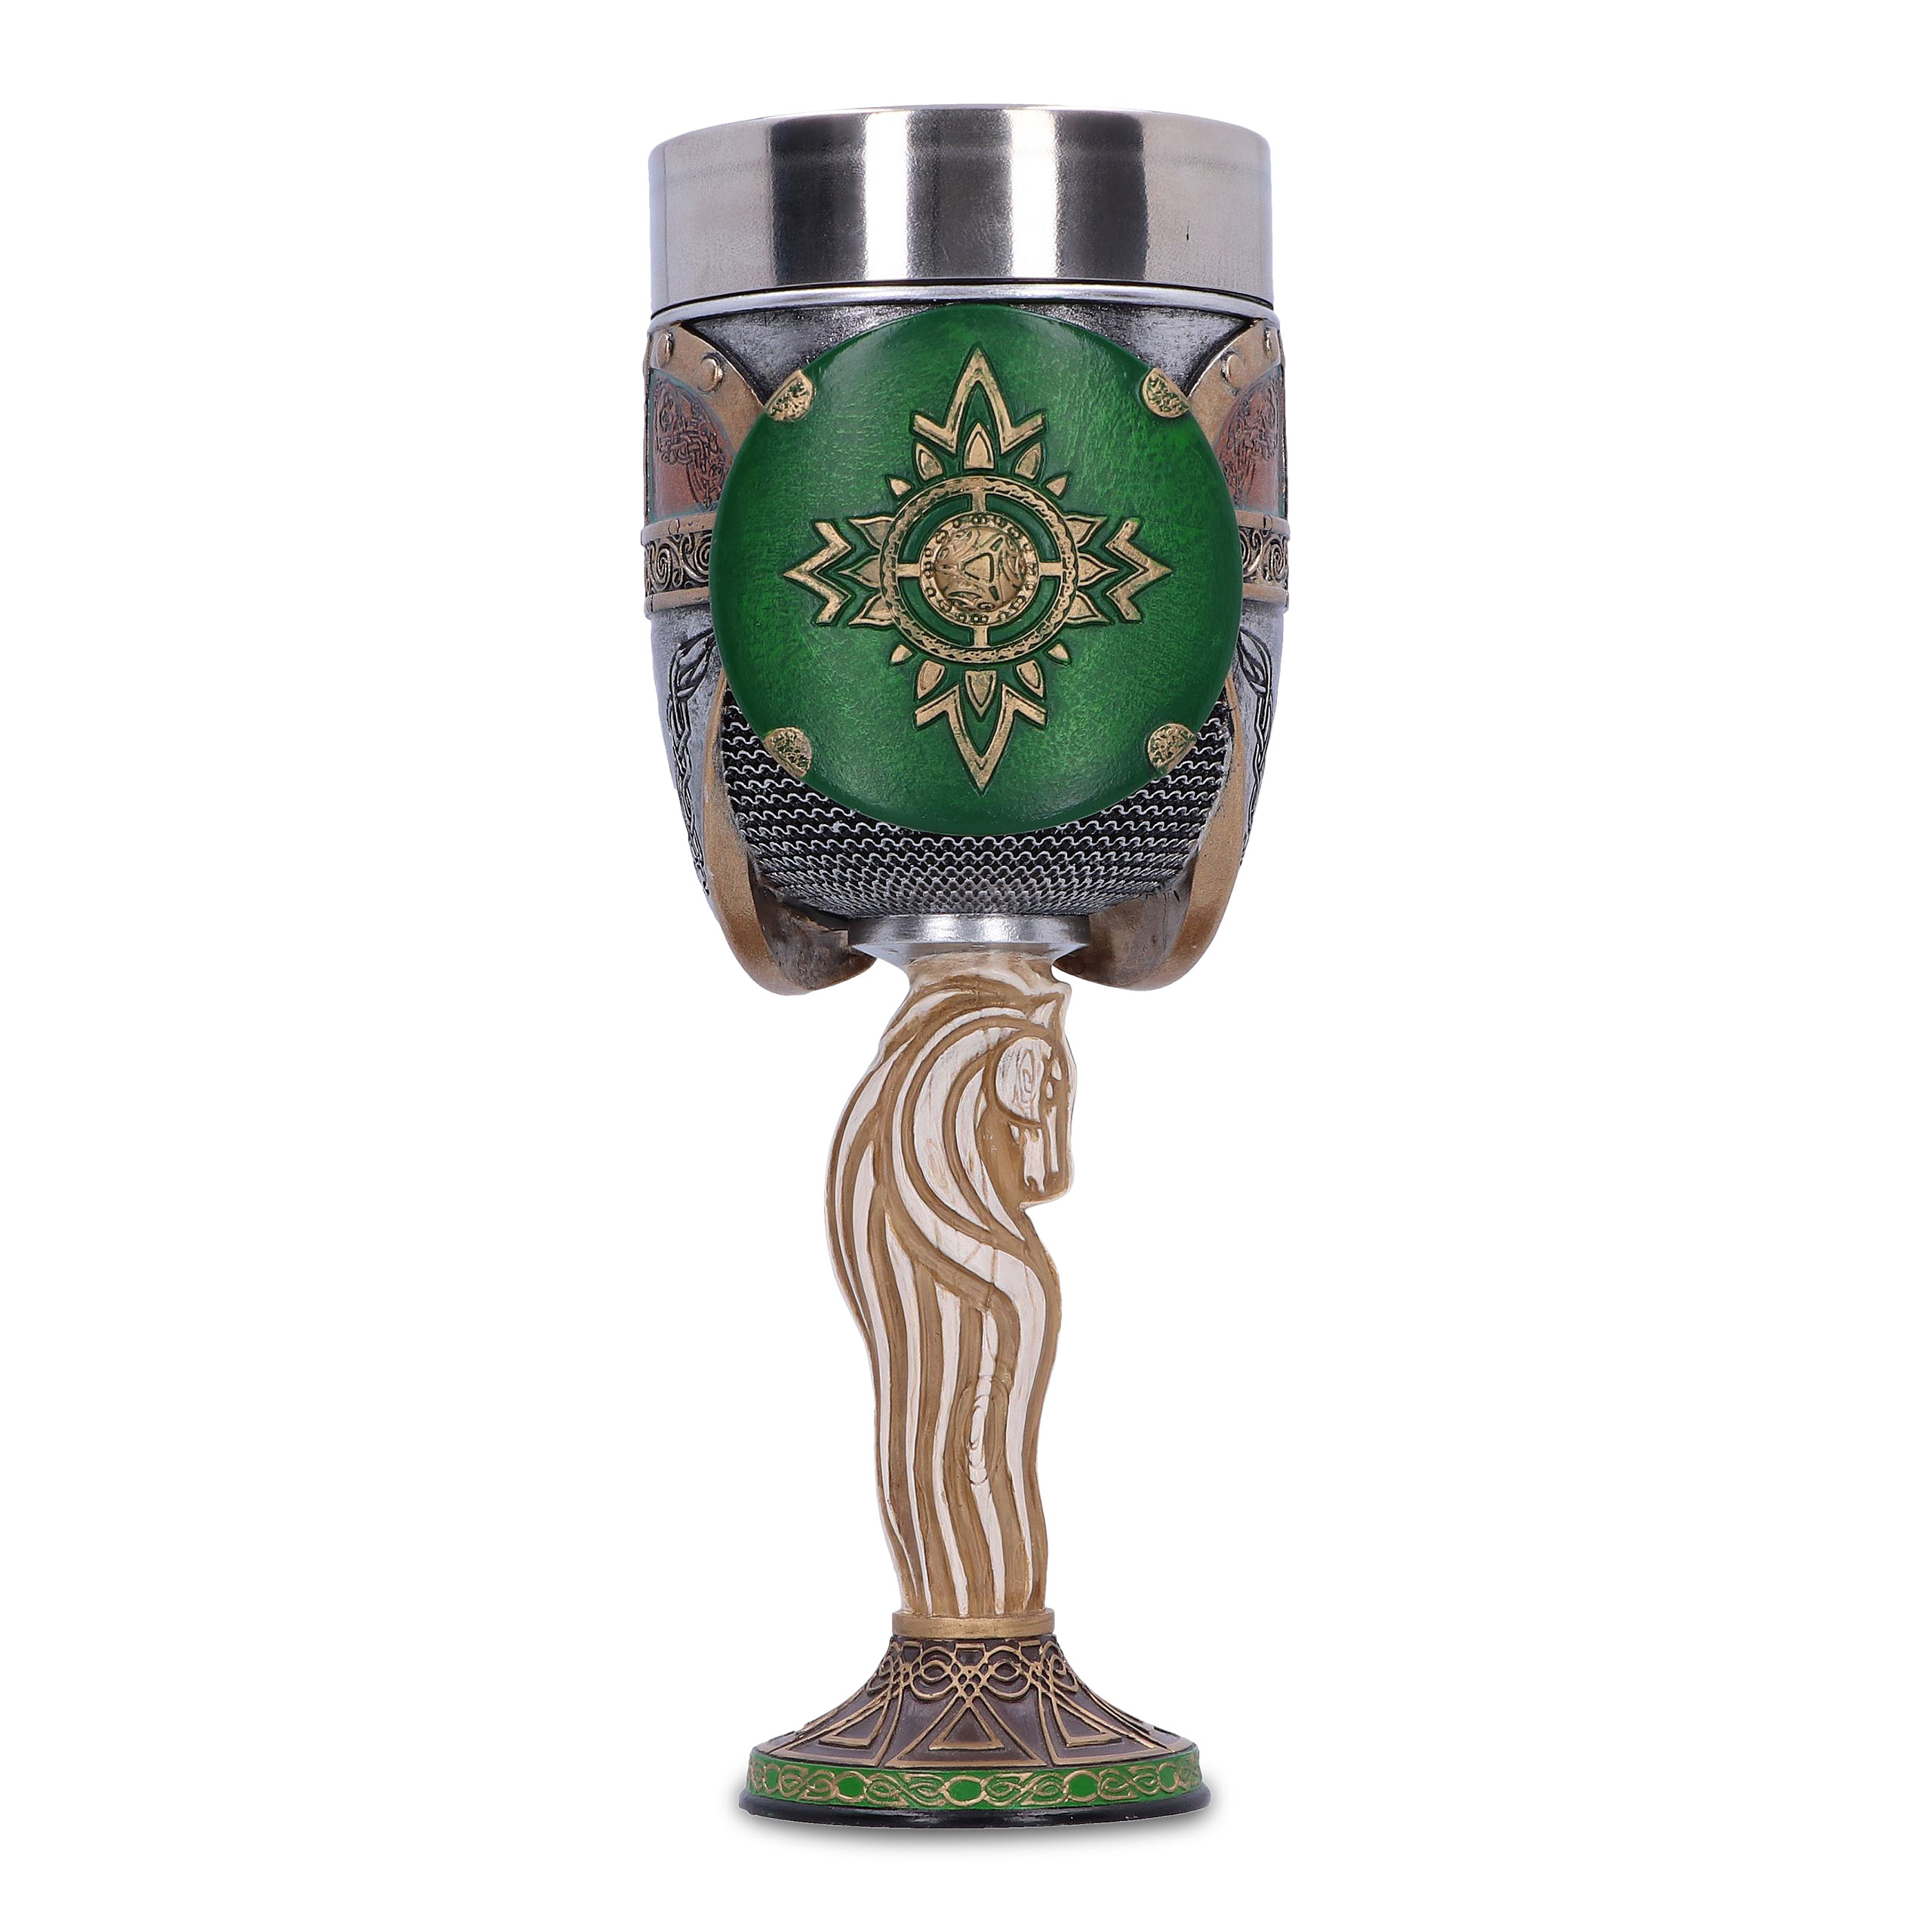 Lord of the Rings - Rohan Goblet deluxe